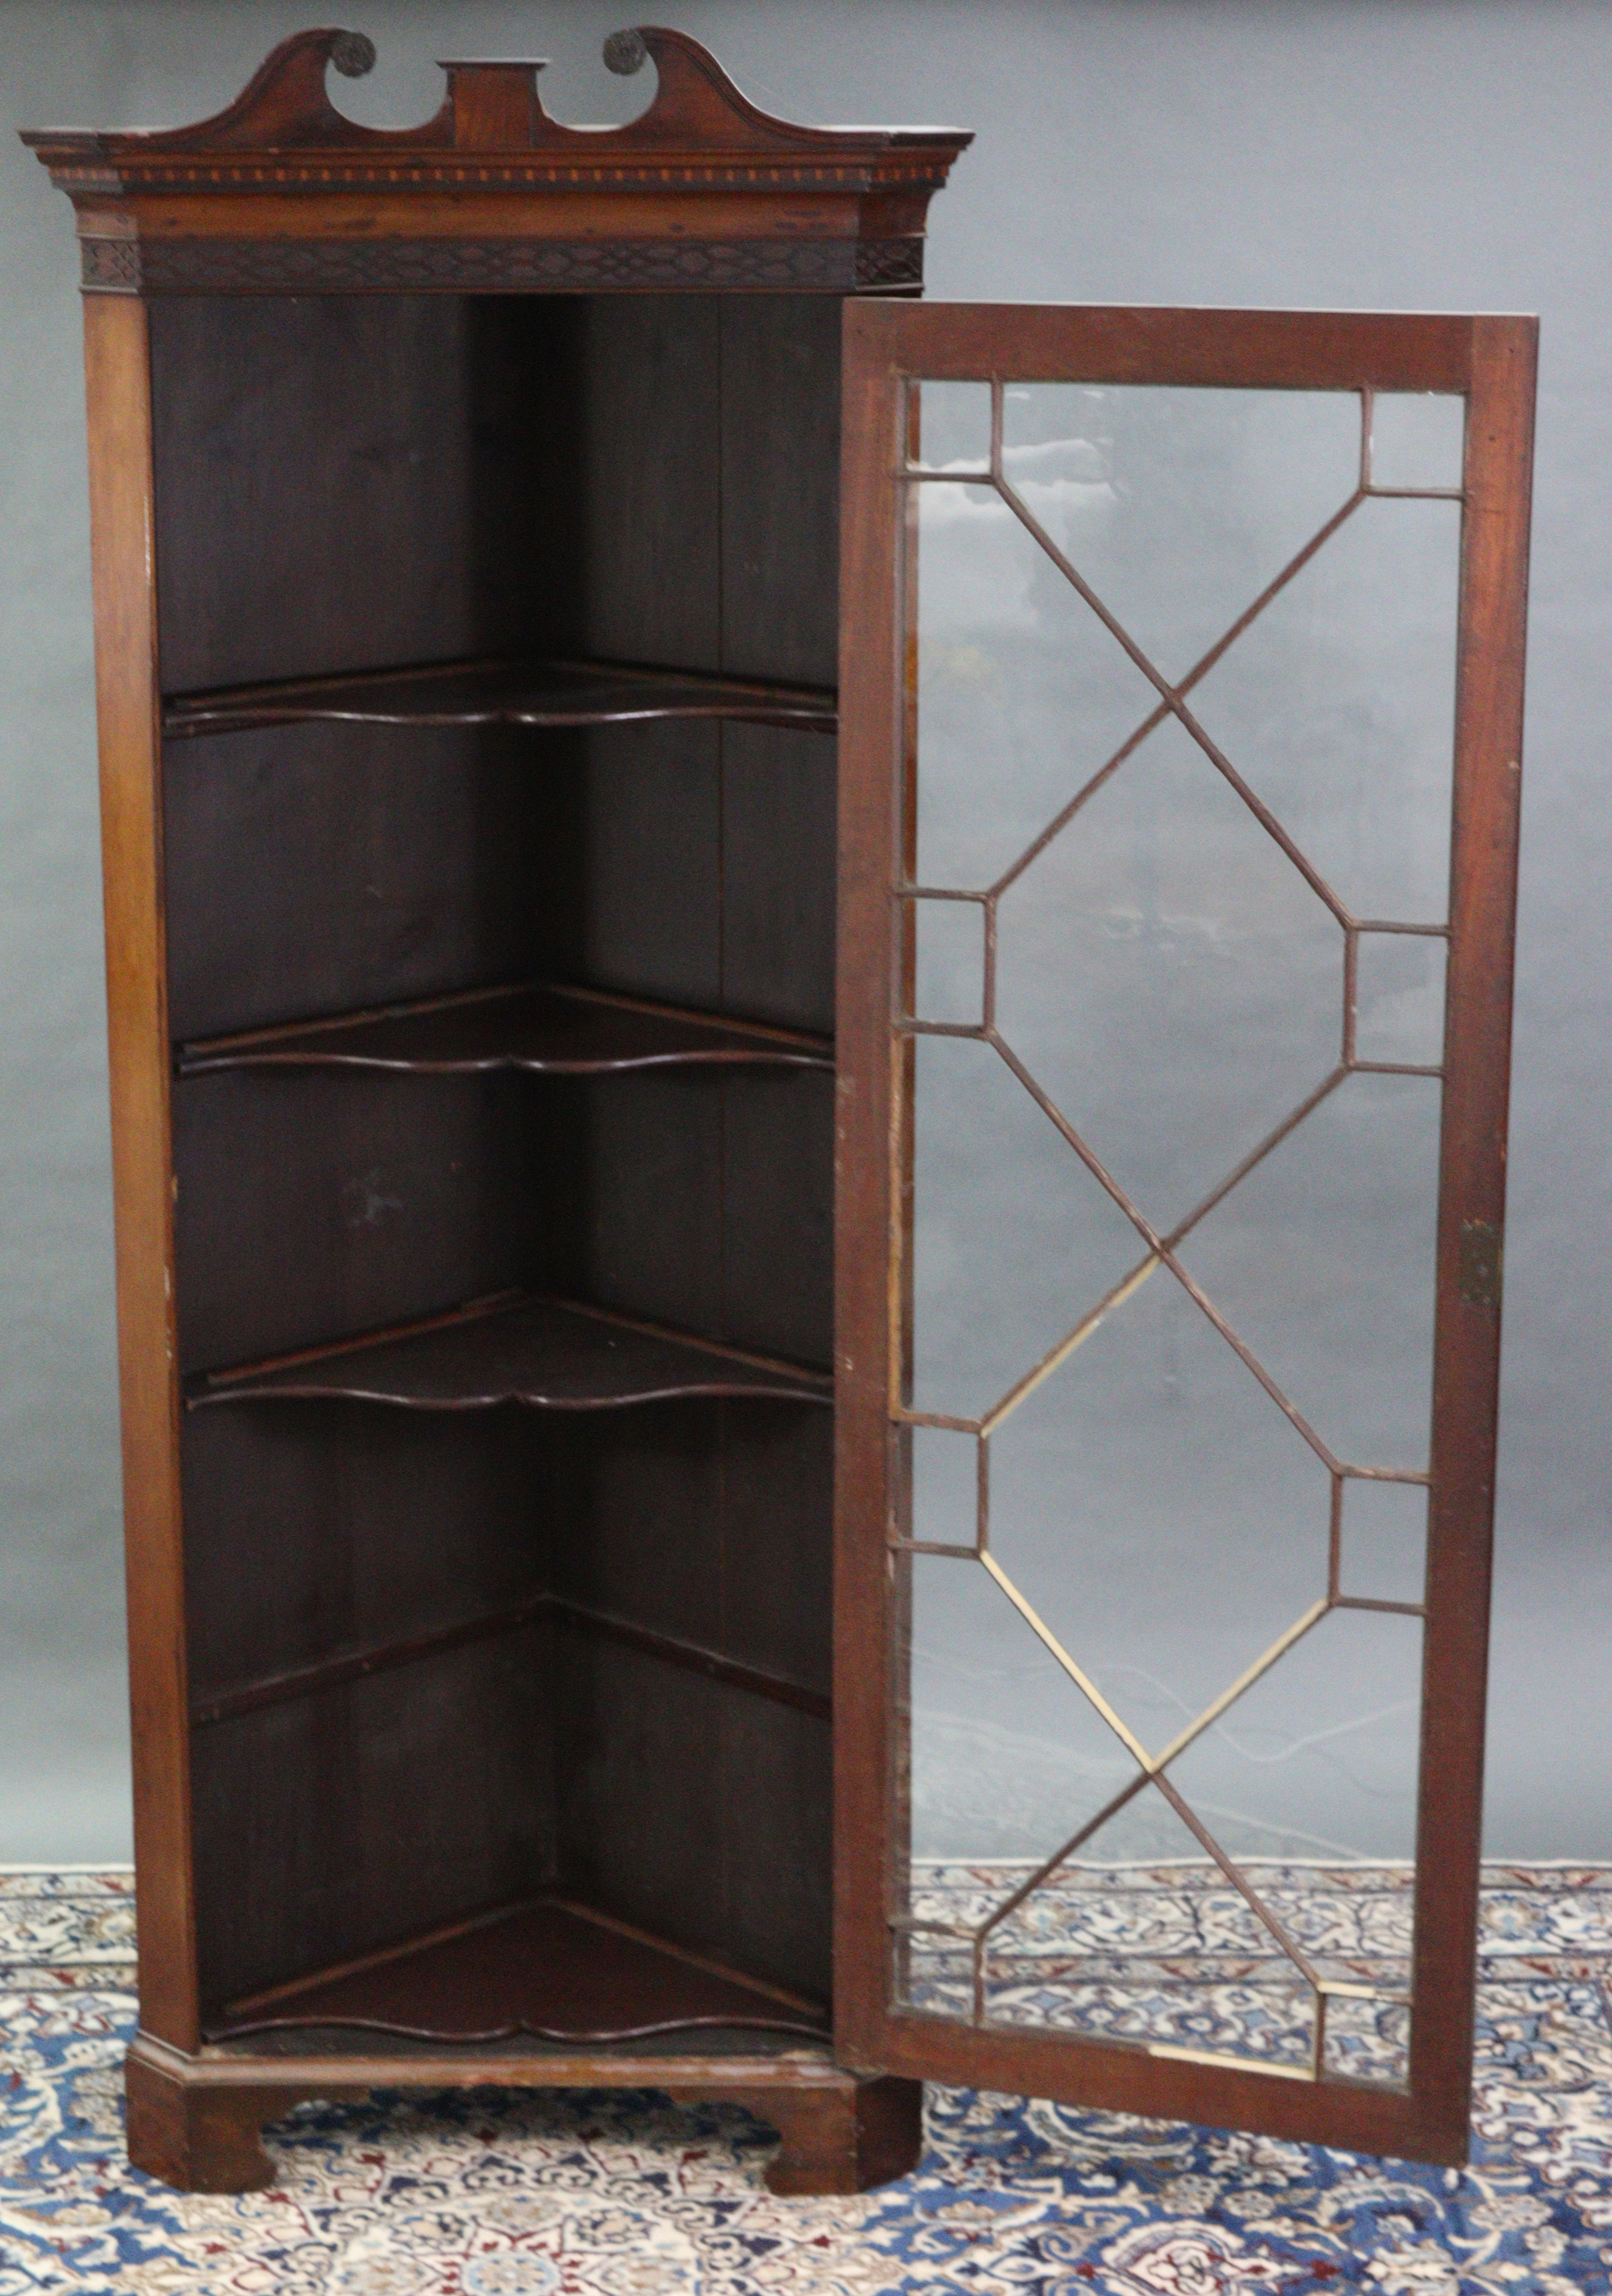 A 19th century mahogany standing corner cabinet, with broken-arch swan-neck cornice above - Image 2 of 2